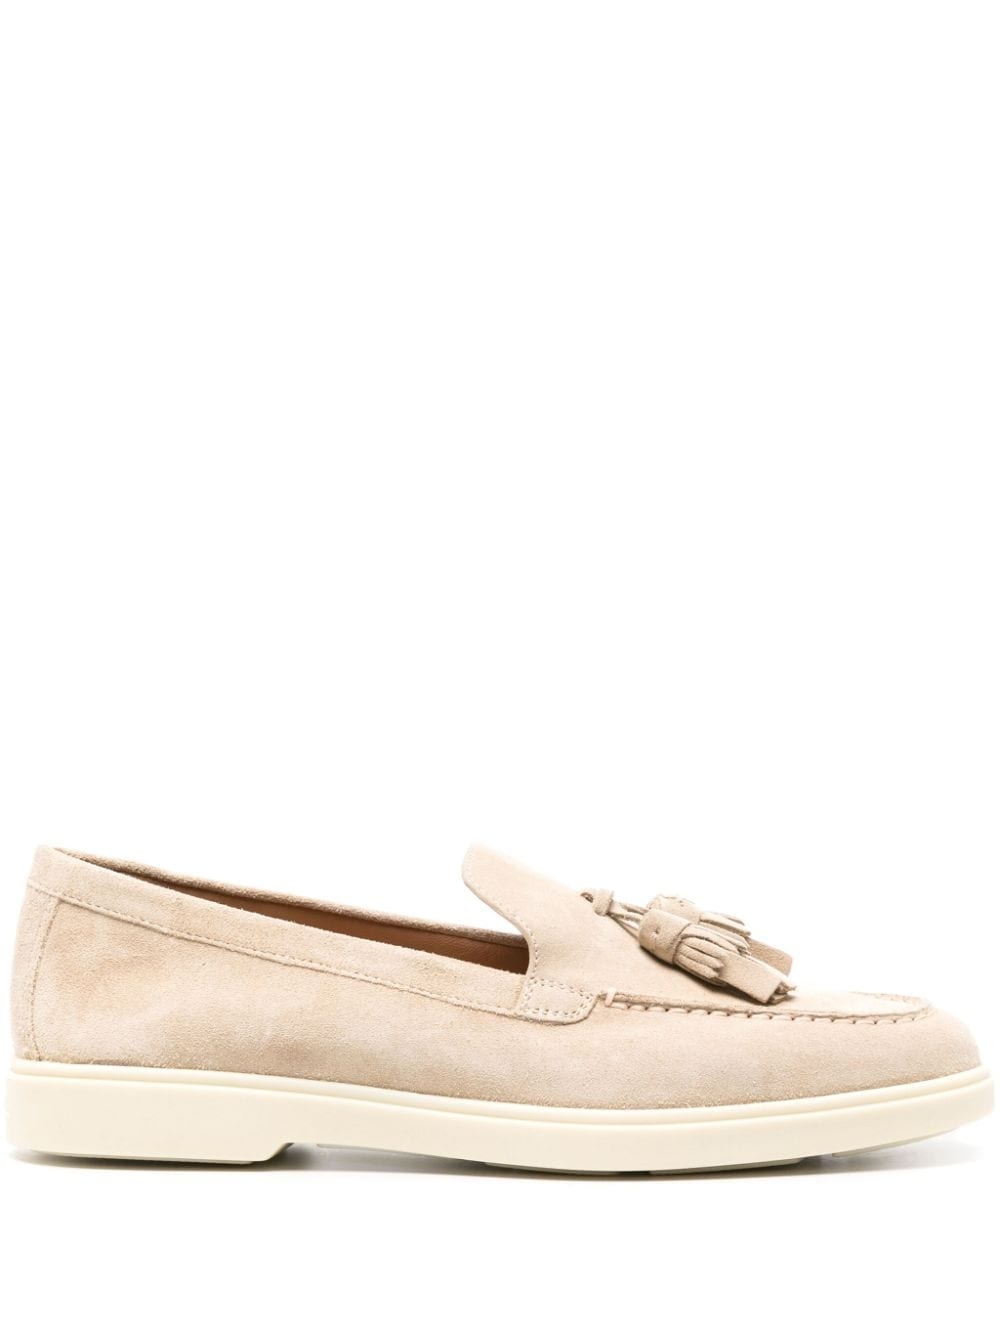 tassel-detailed suede loafers - 1